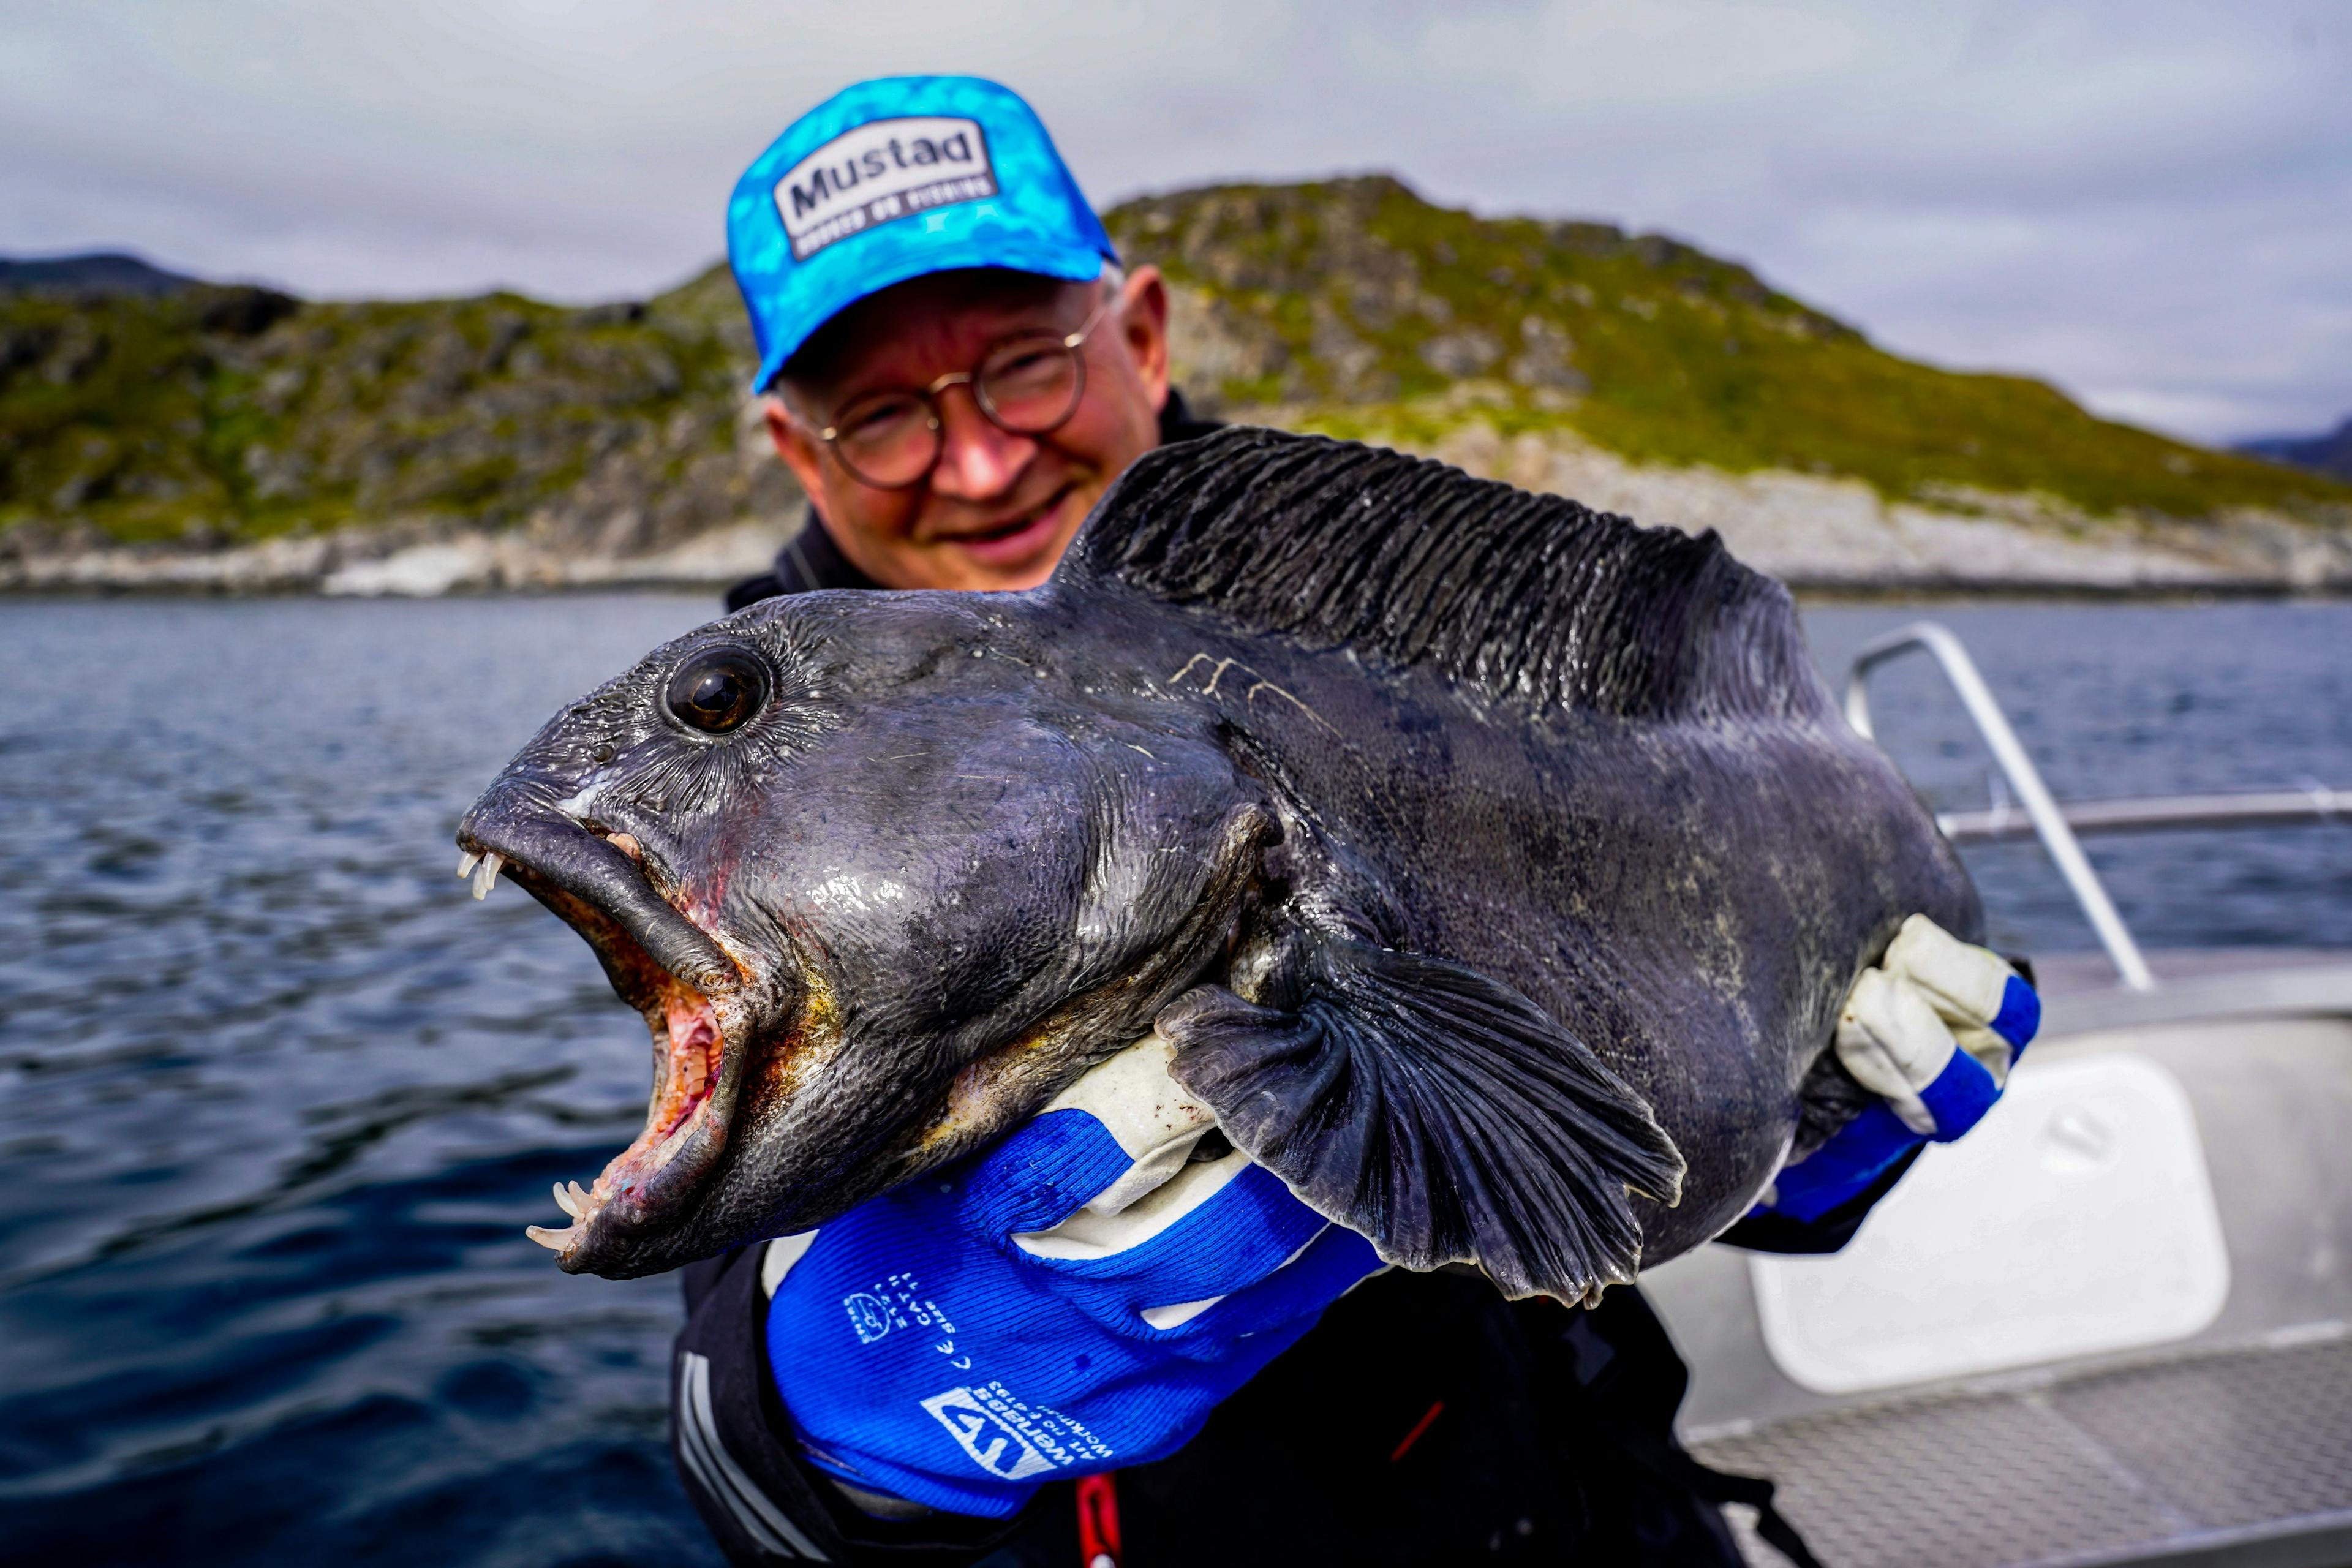 Cast your net wide! - Up Norway